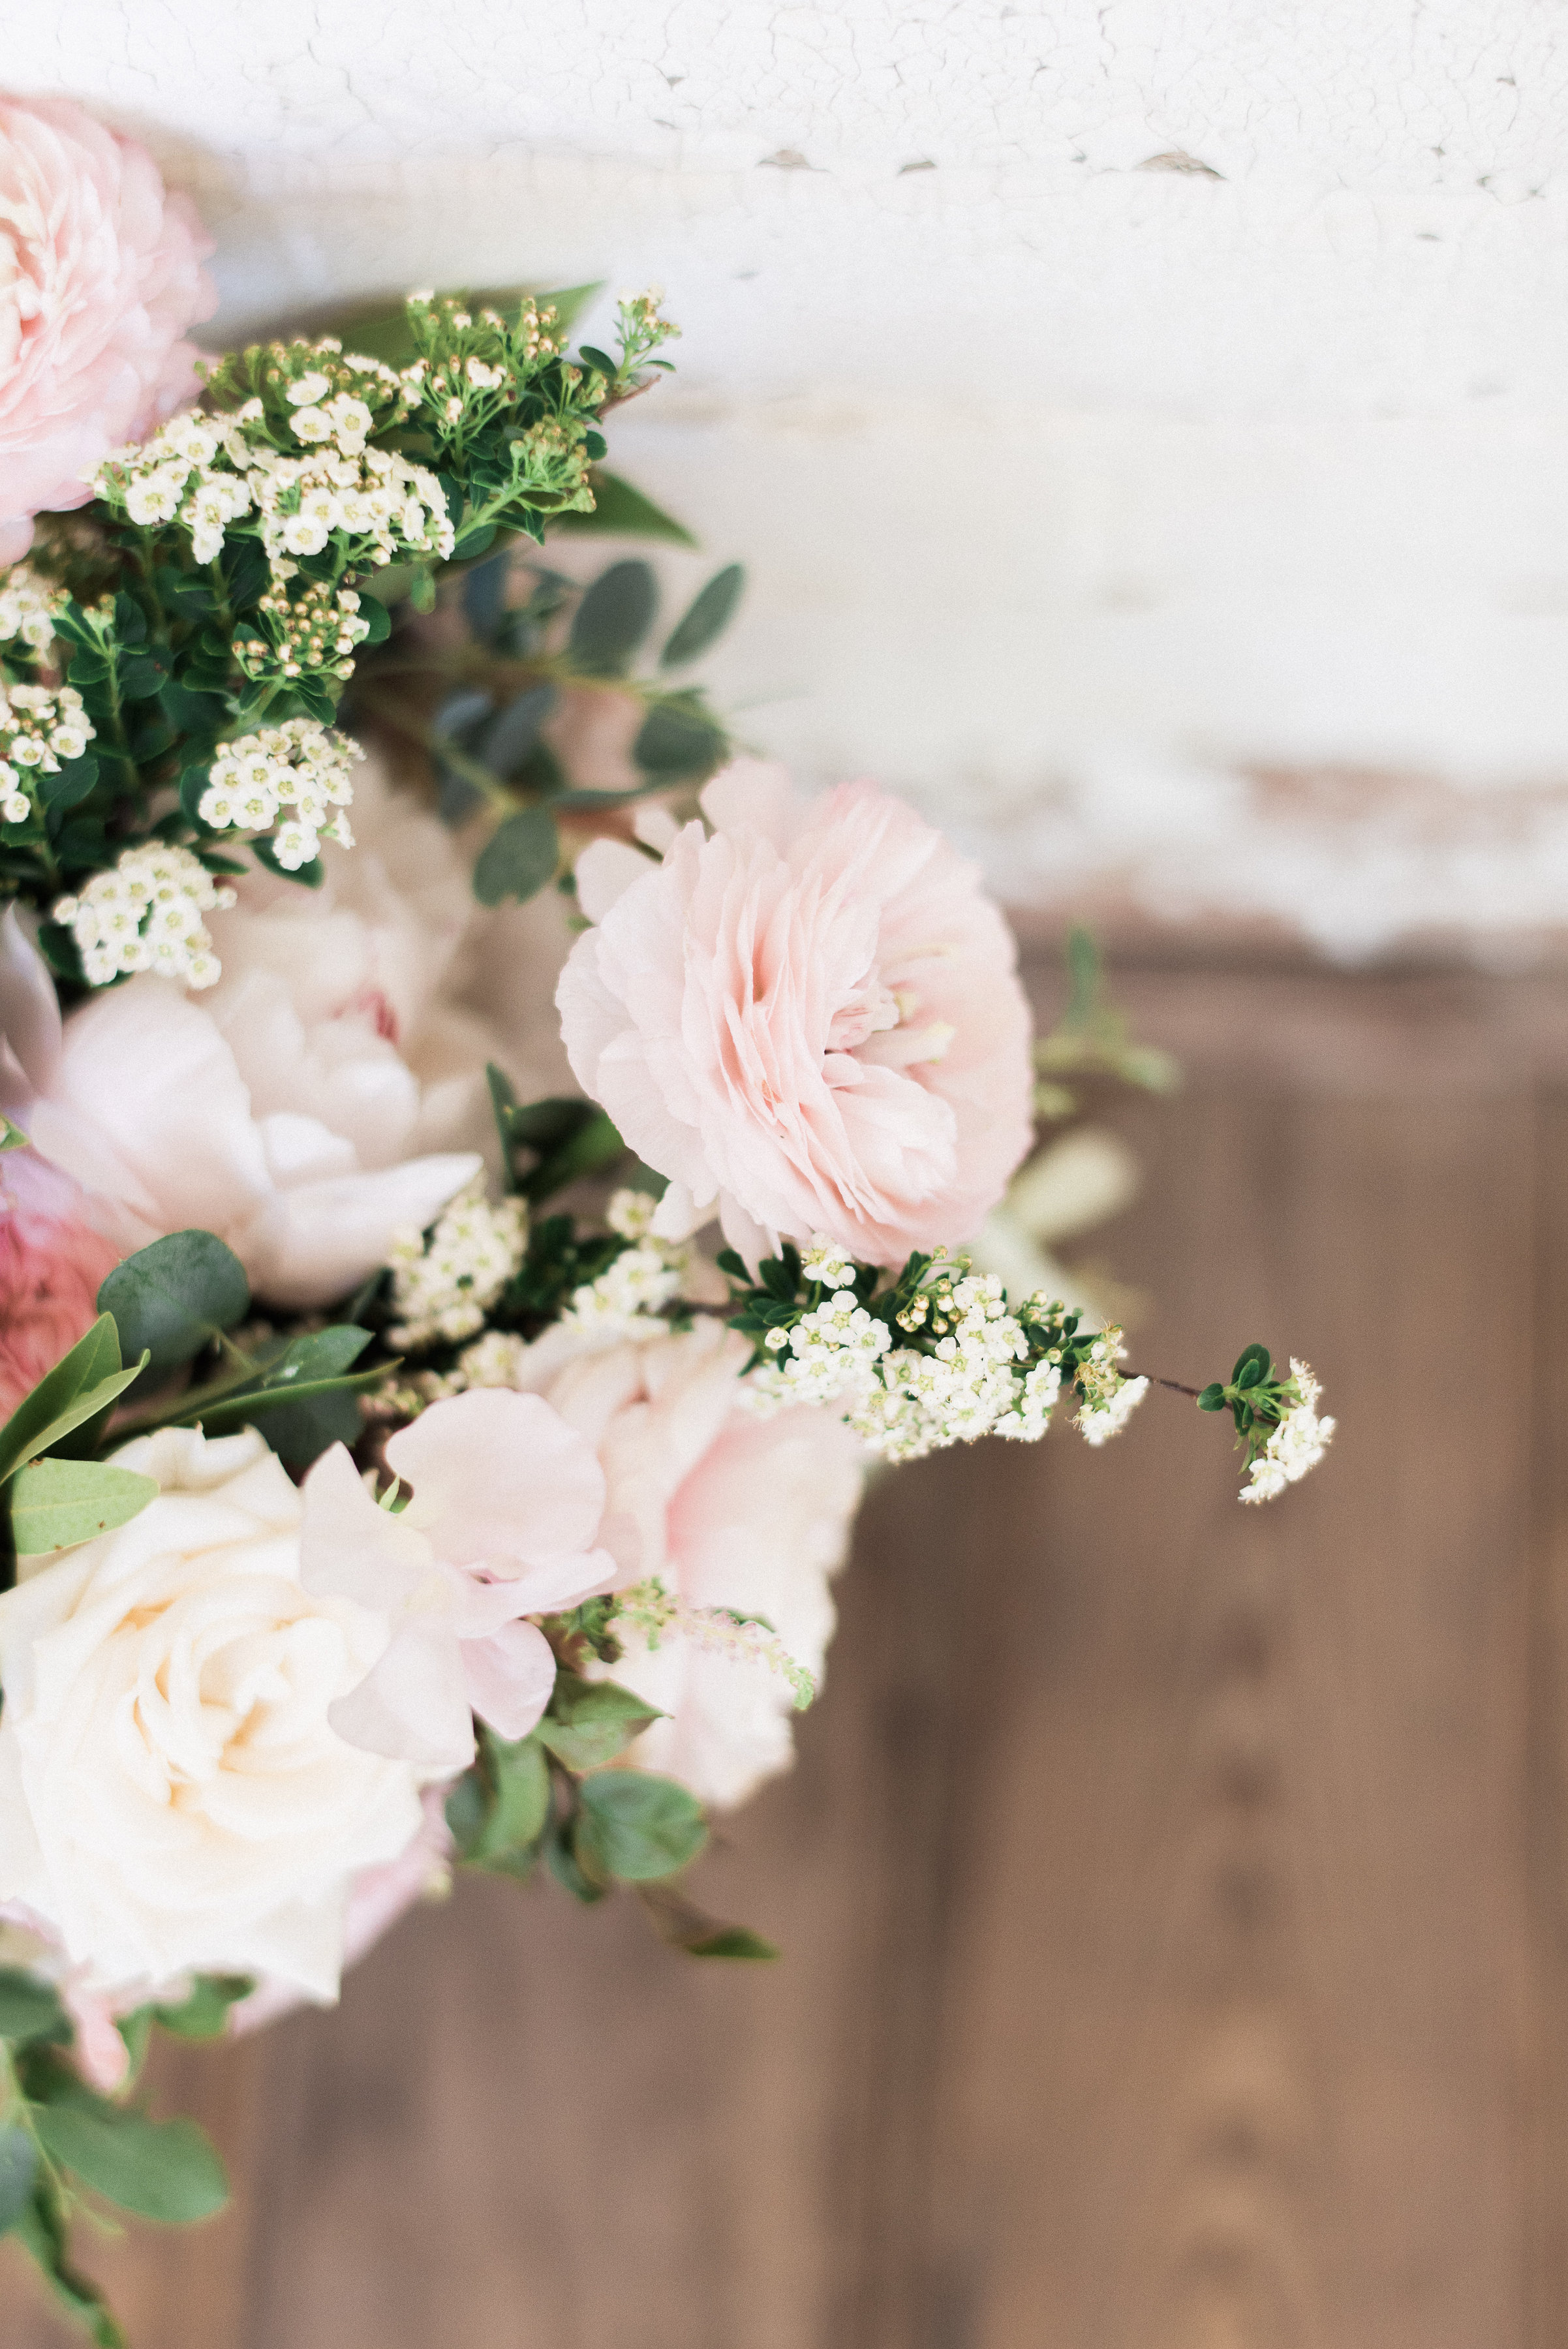 Blush and ivory bridal bouquet with peonies, ranunculus, and lush greenery // Nashville Wedding Florist